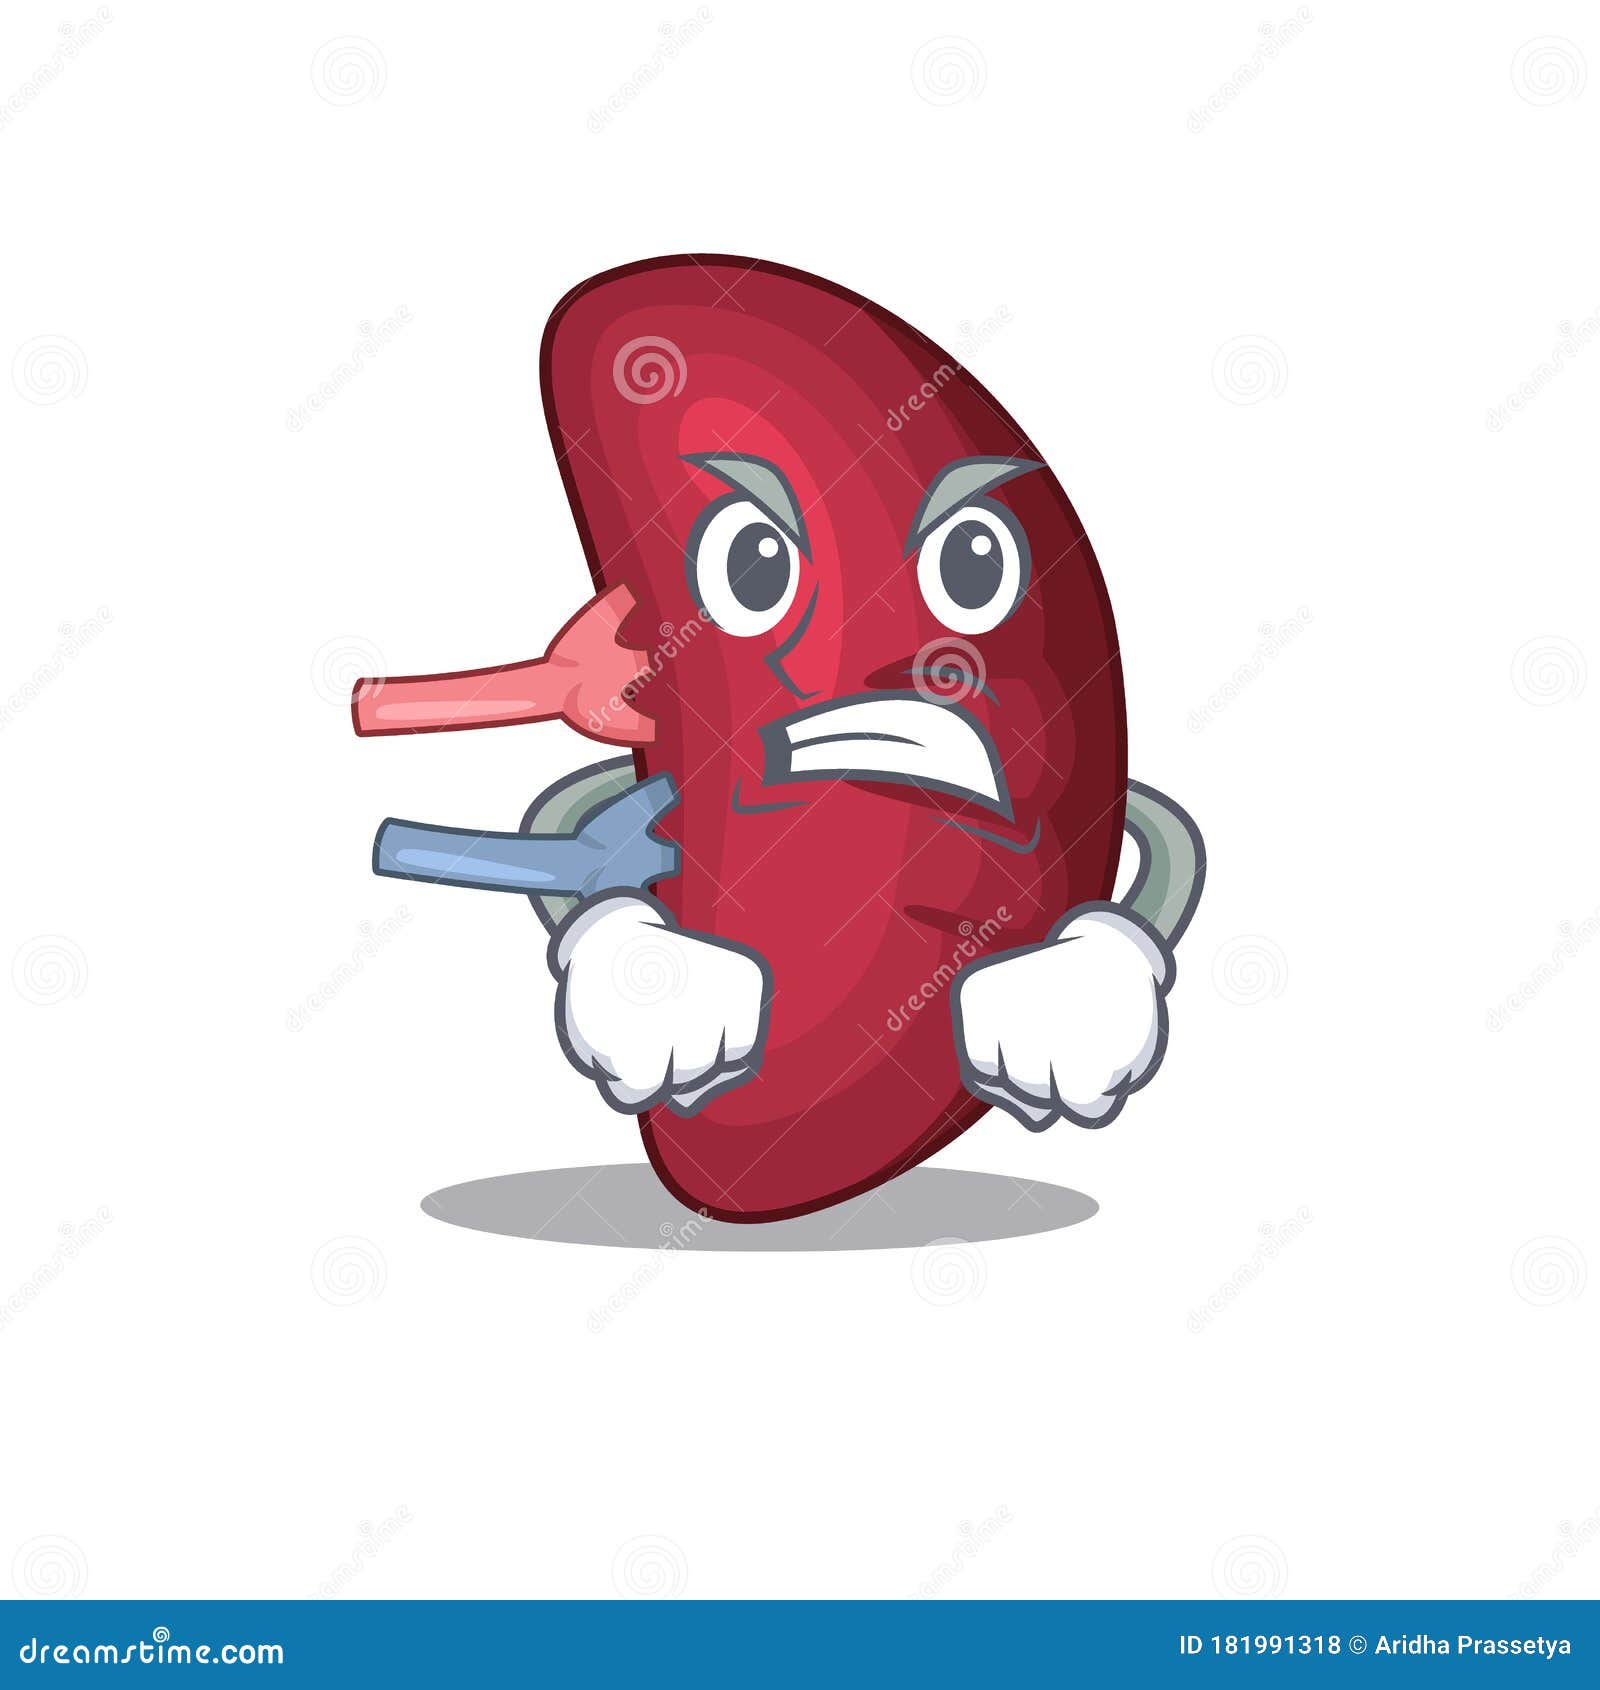 Mascot Design Concept of Human Spleen with Angry Face Stock Vector ...